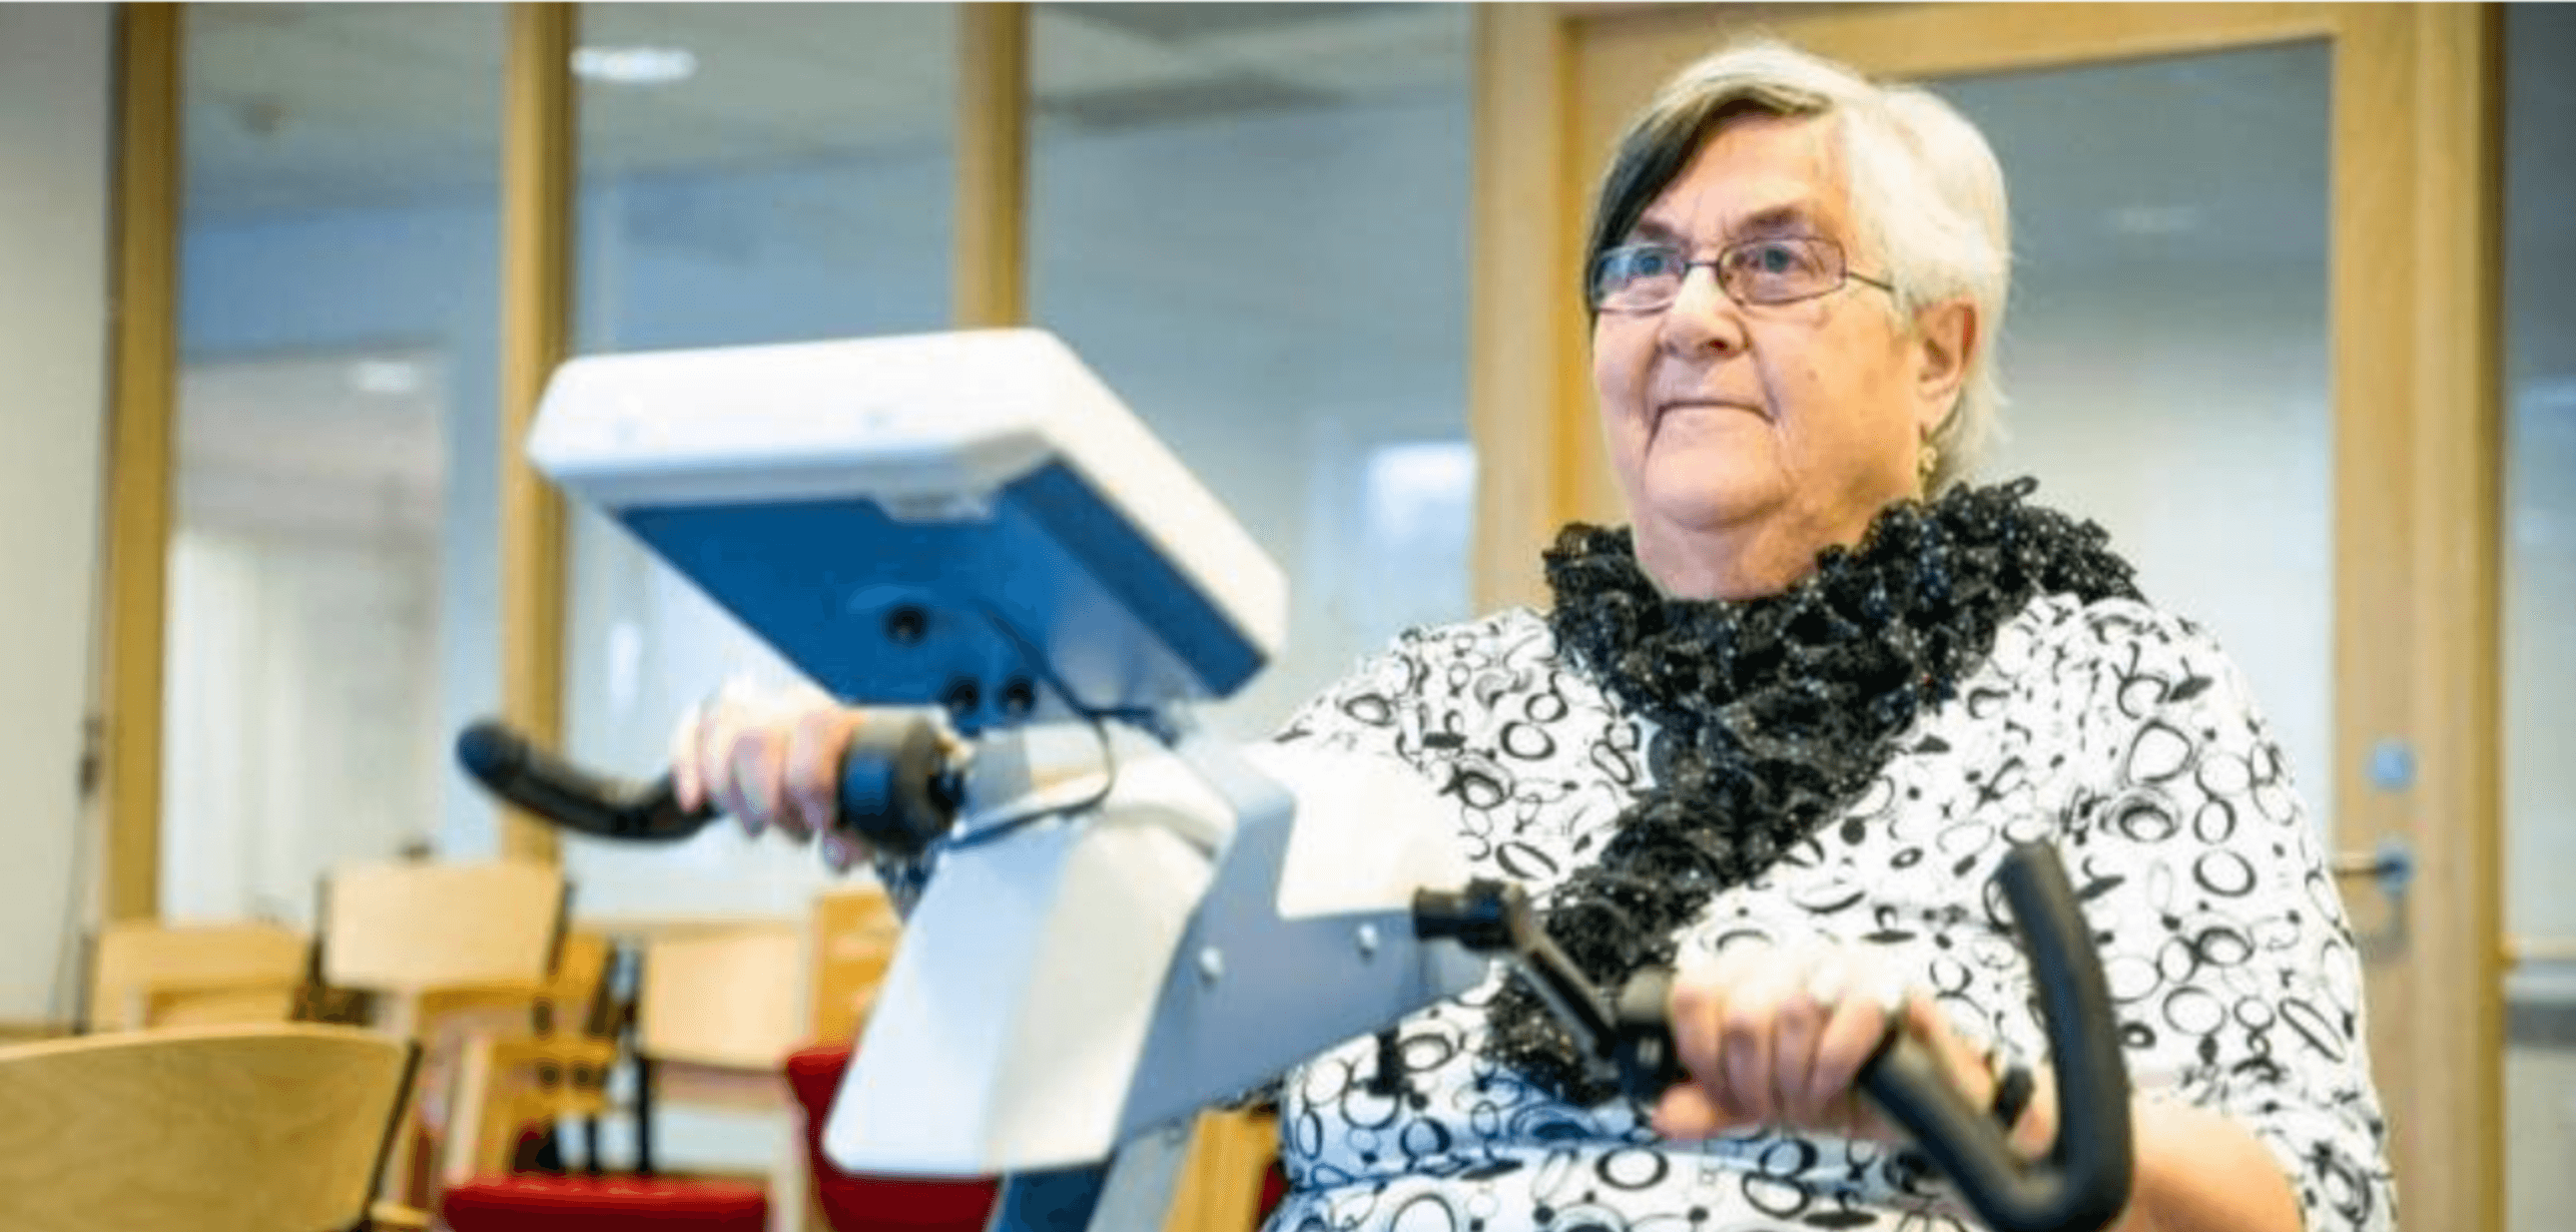 Wenche Gjertsen’s life was badly affected by daily falls. After three months’ training with Motiview, she has only fallen three times. – It’s an absolute revelation; it’s unbelievable, the 75-year-old says.